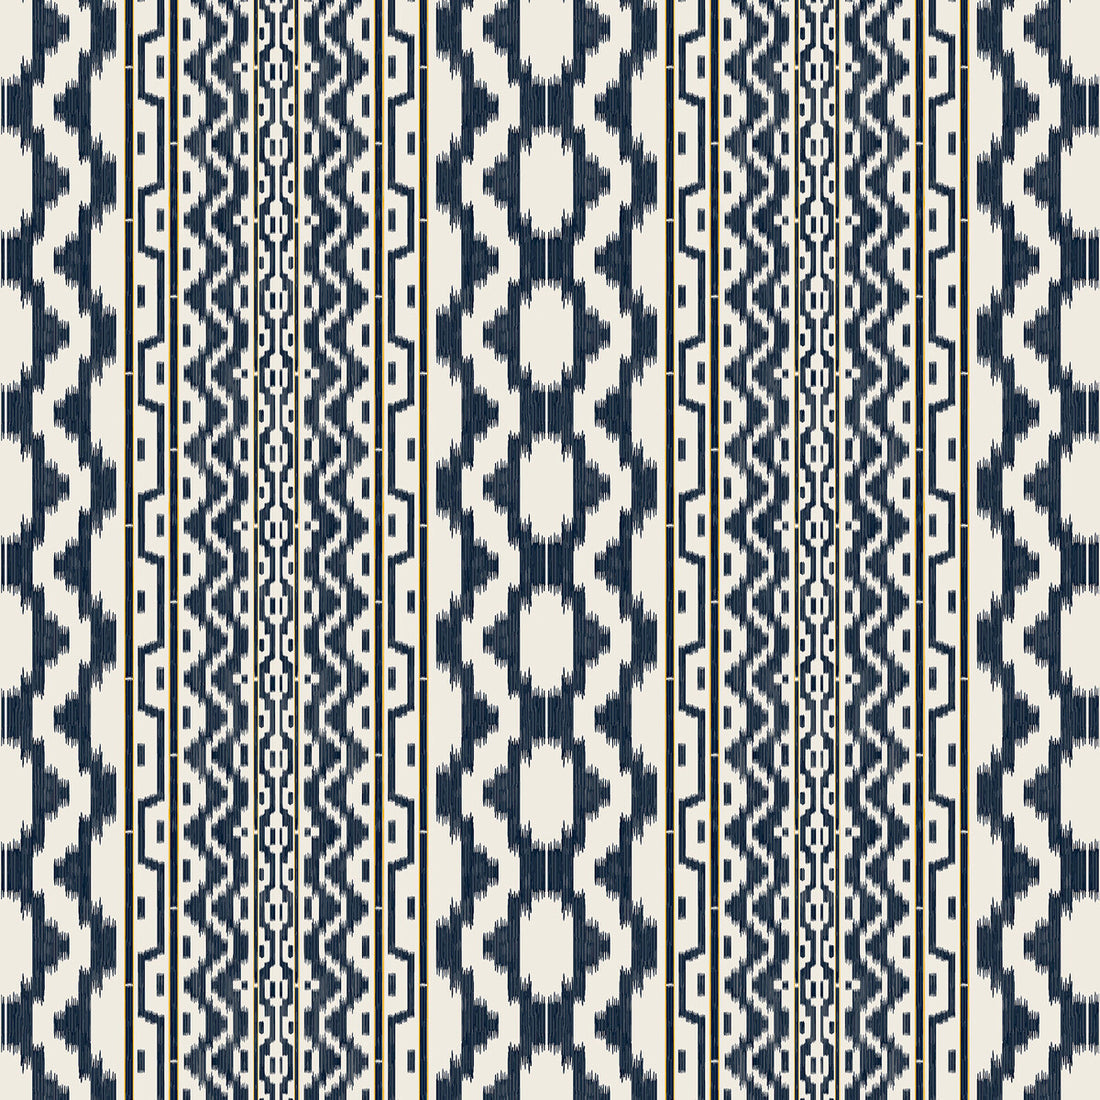 Cala Murada fabric in navy color - pattern GDT5682.003.0 - by Gaston y Daniela in the Gaston Maiorica collection